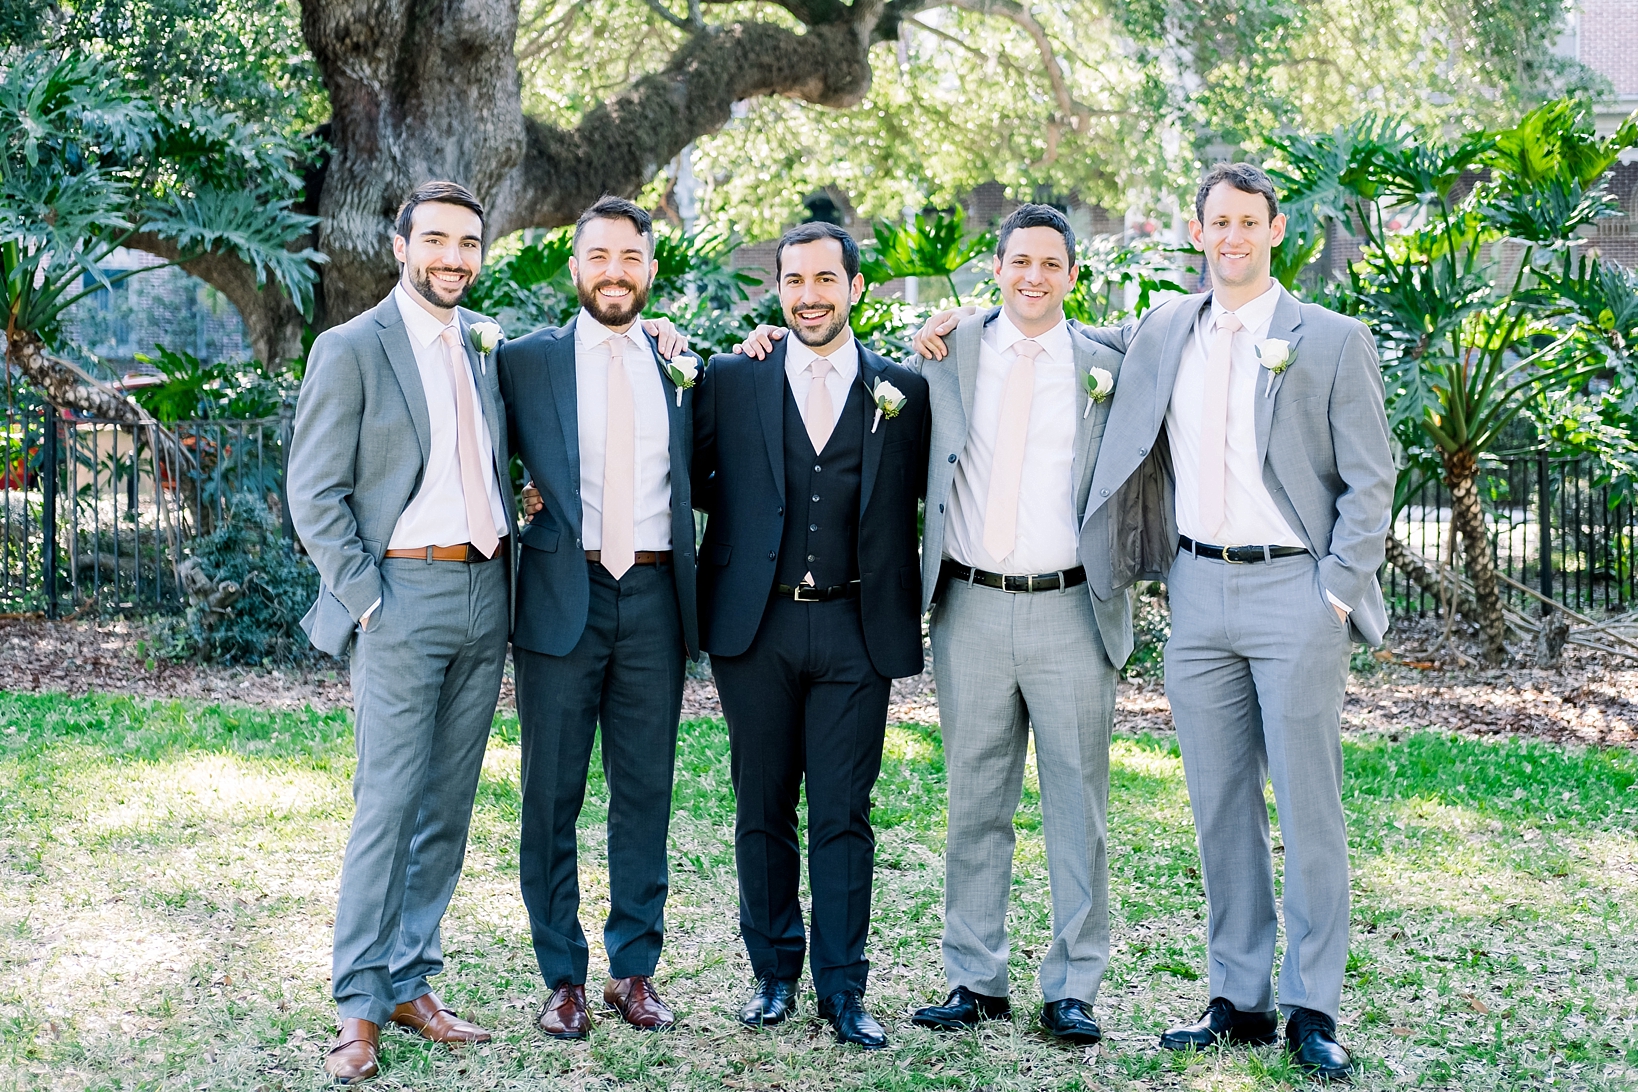 Groom and his Groomsmen standing together for a nice portrait